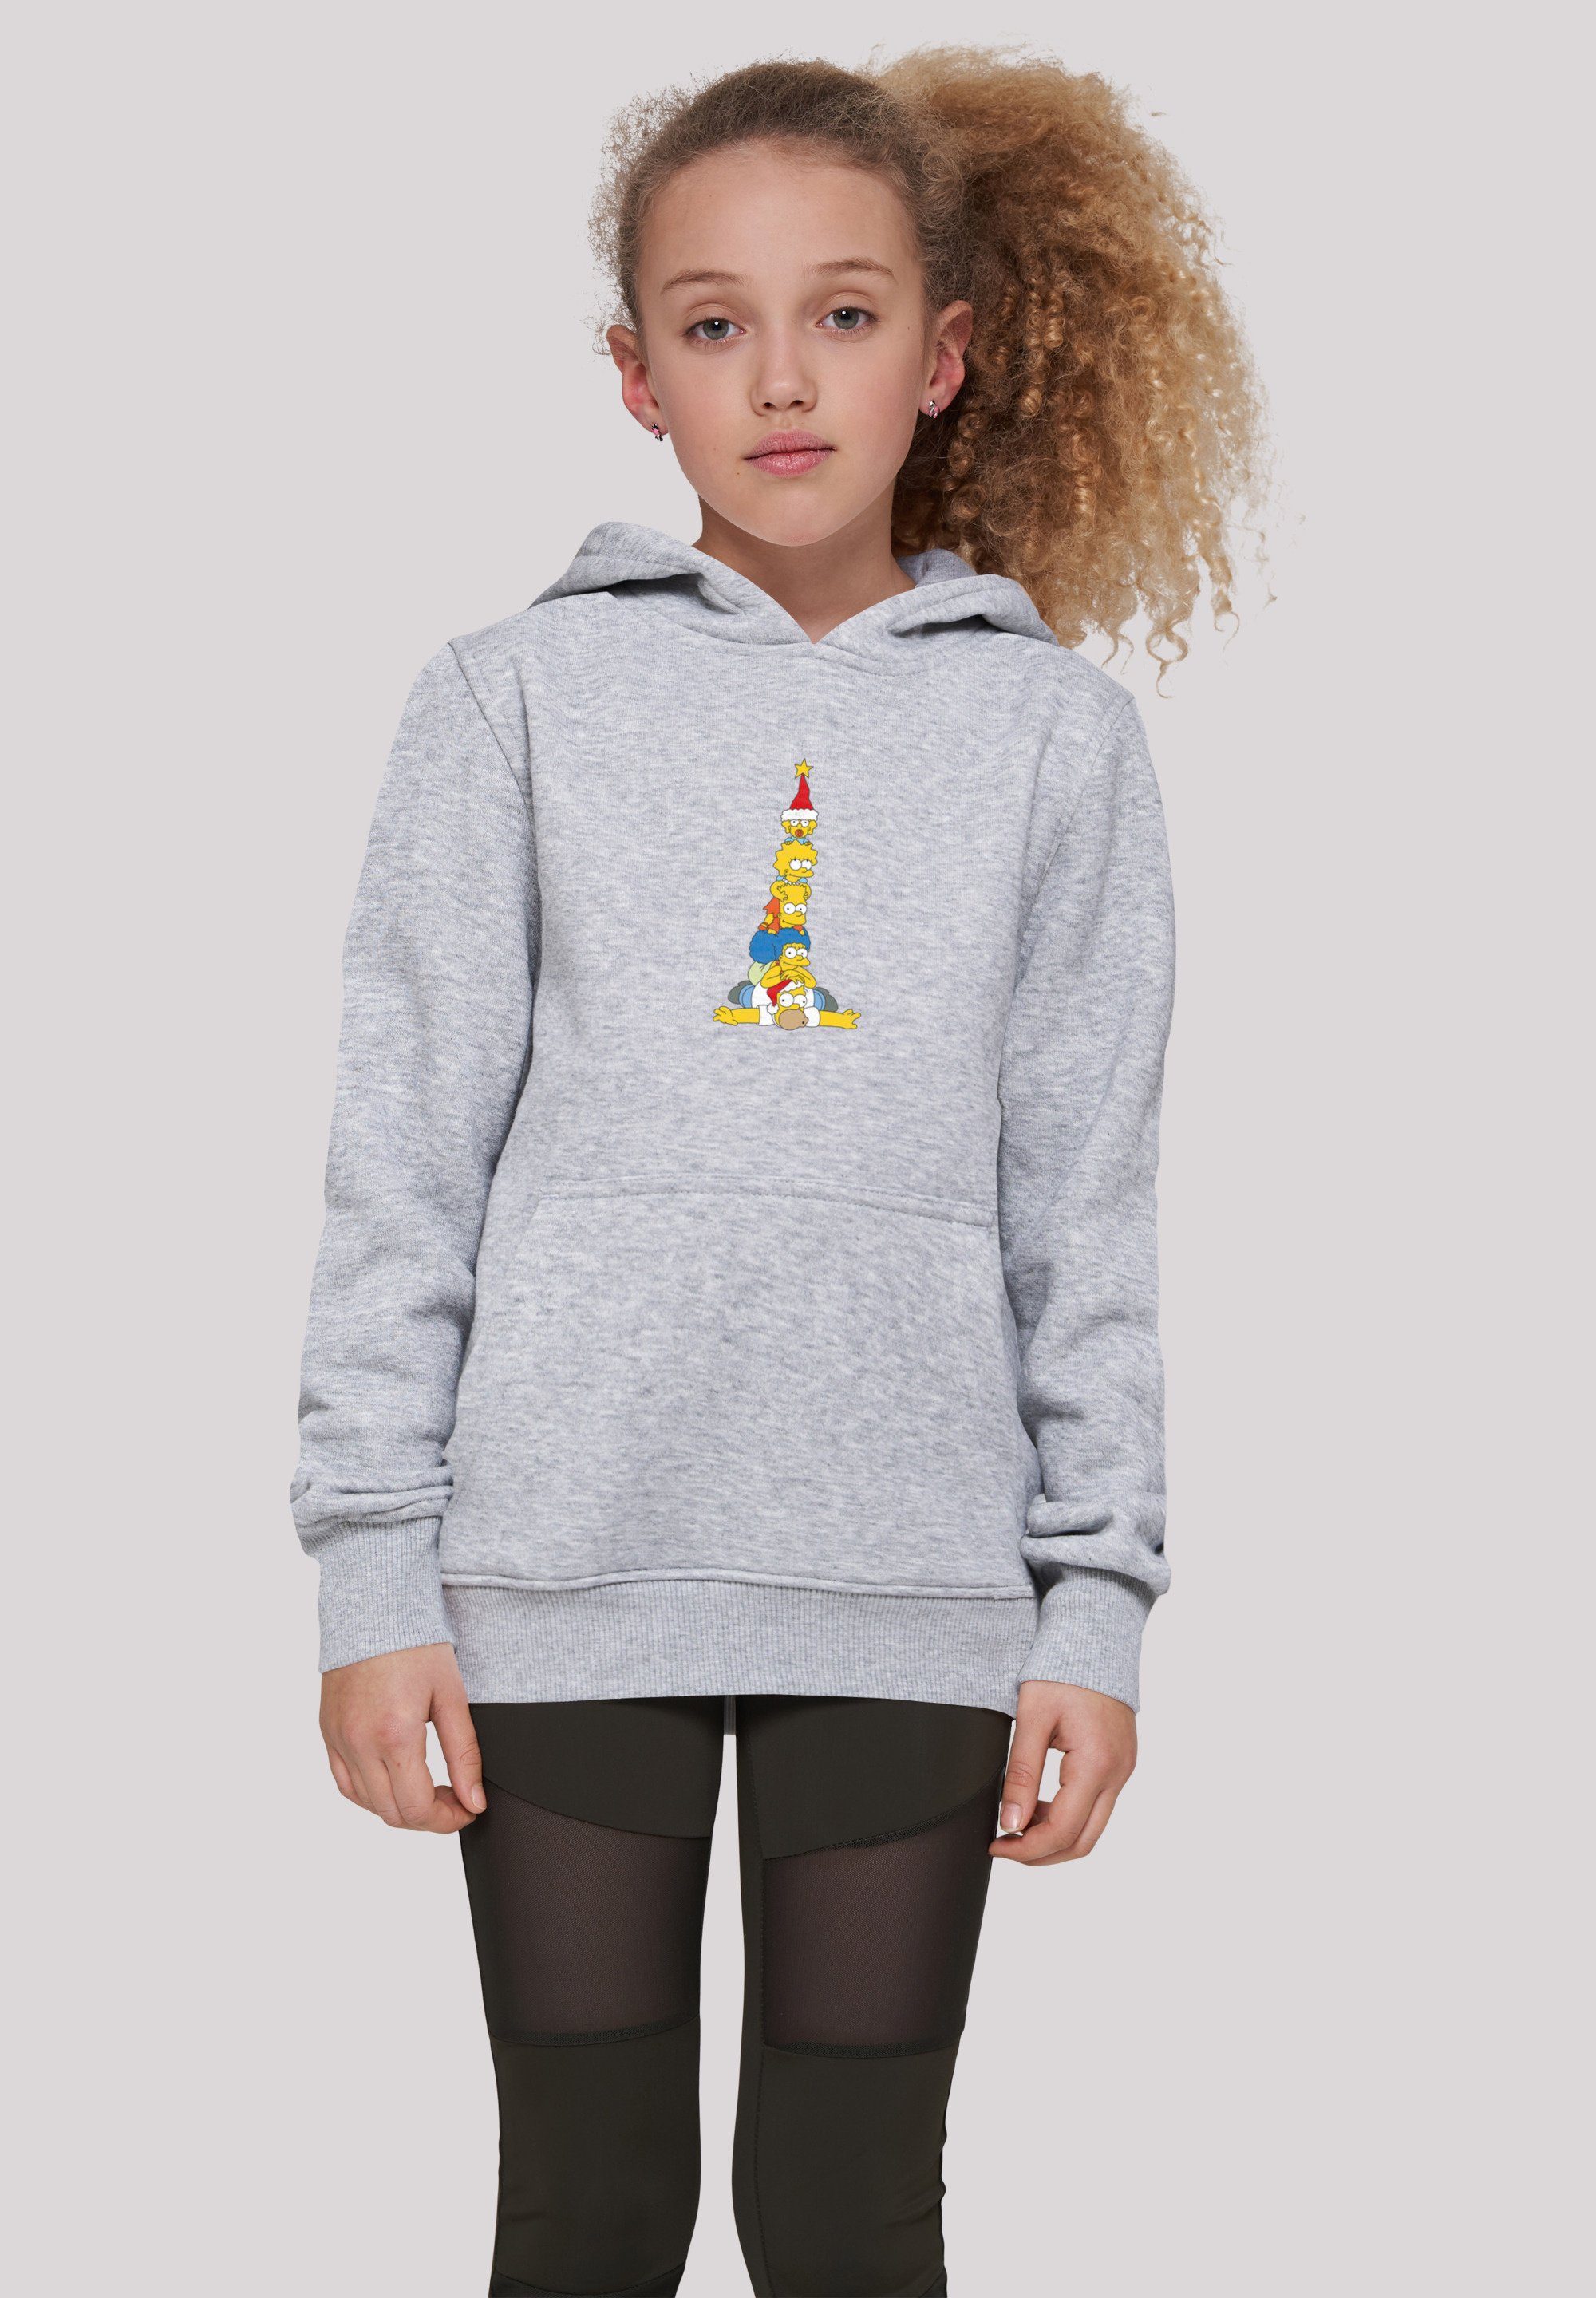 F4NT4STIC Kapuzenpullover The Simpsons Family Christmas Weihnachtsbaum Print heather grey